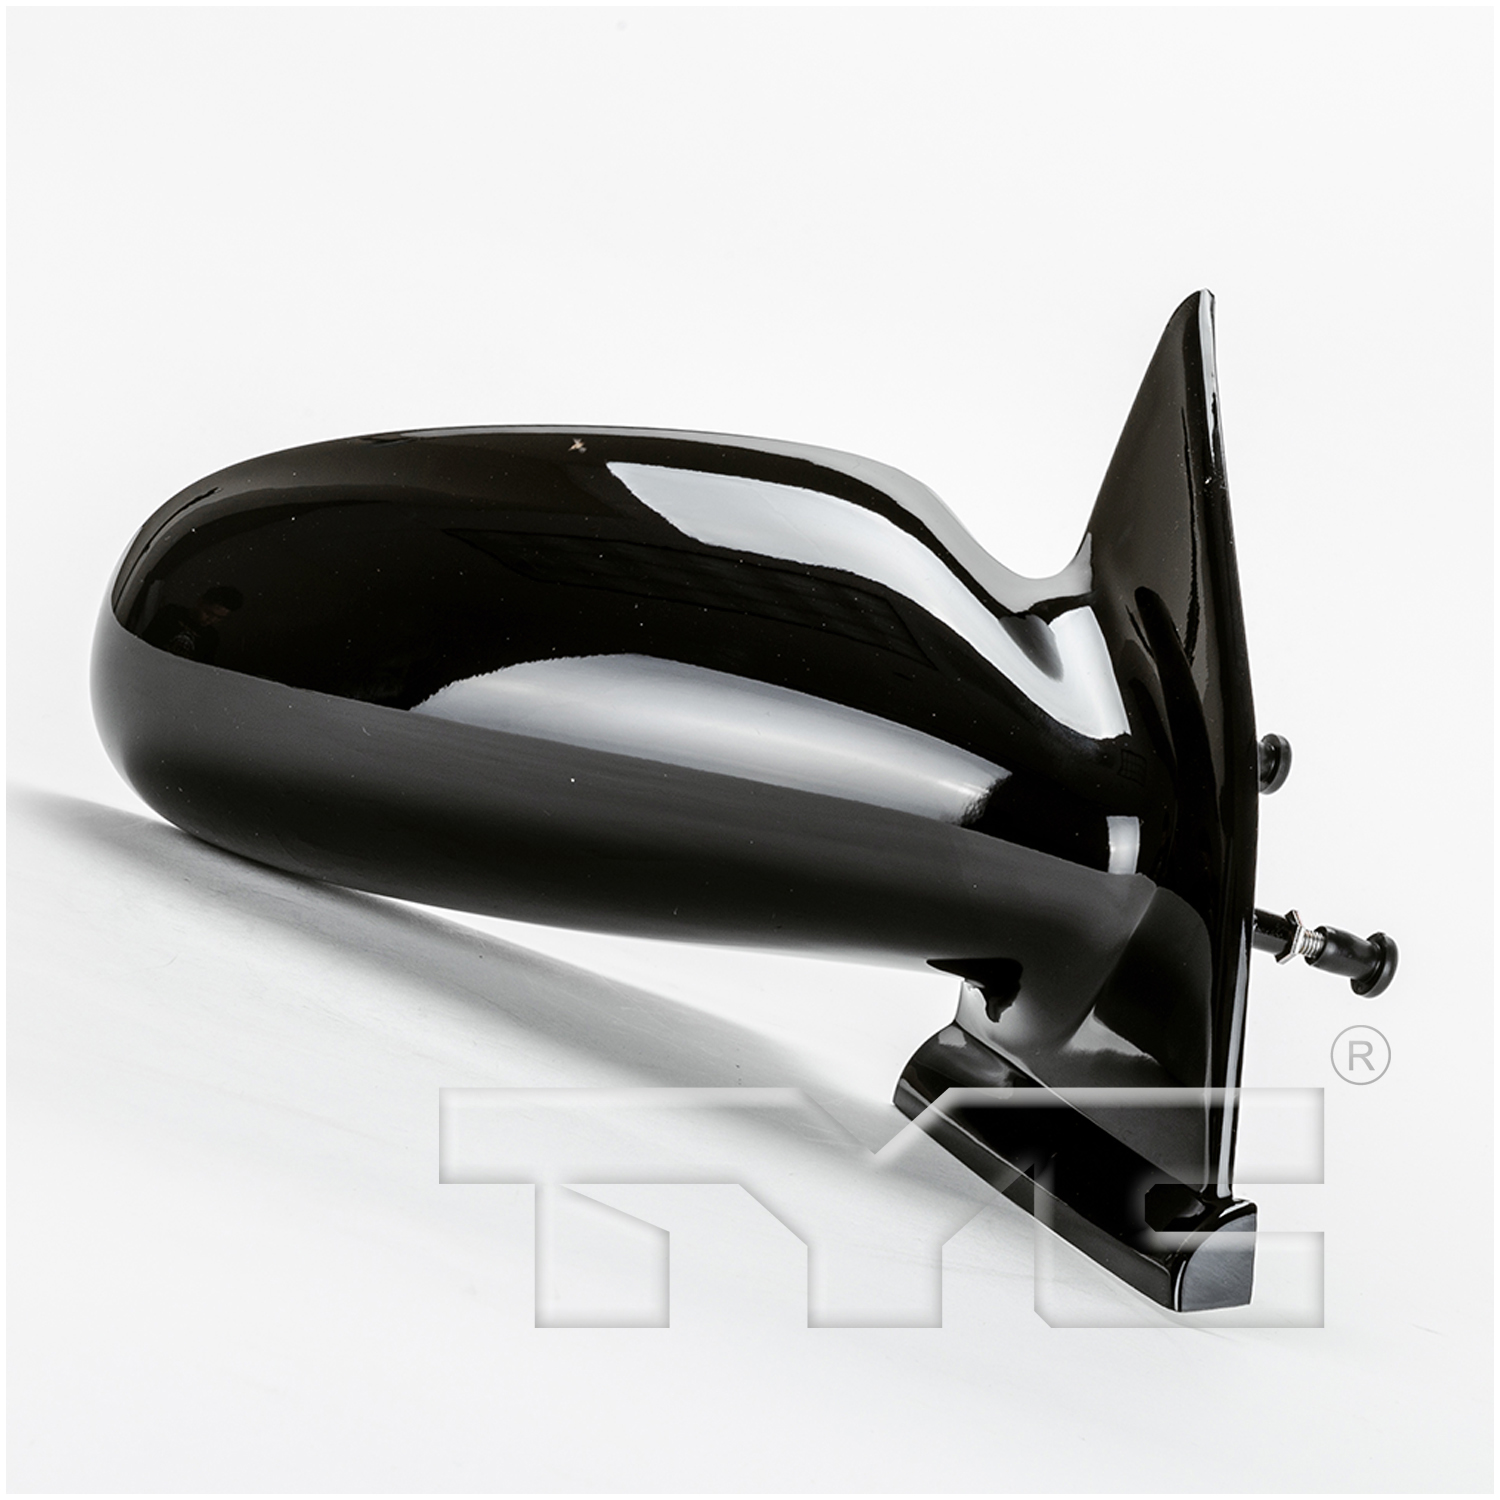 Aftermarket MIRRORS for SATURN - SW1, SW1,96-99,RT Mirror outside rear view